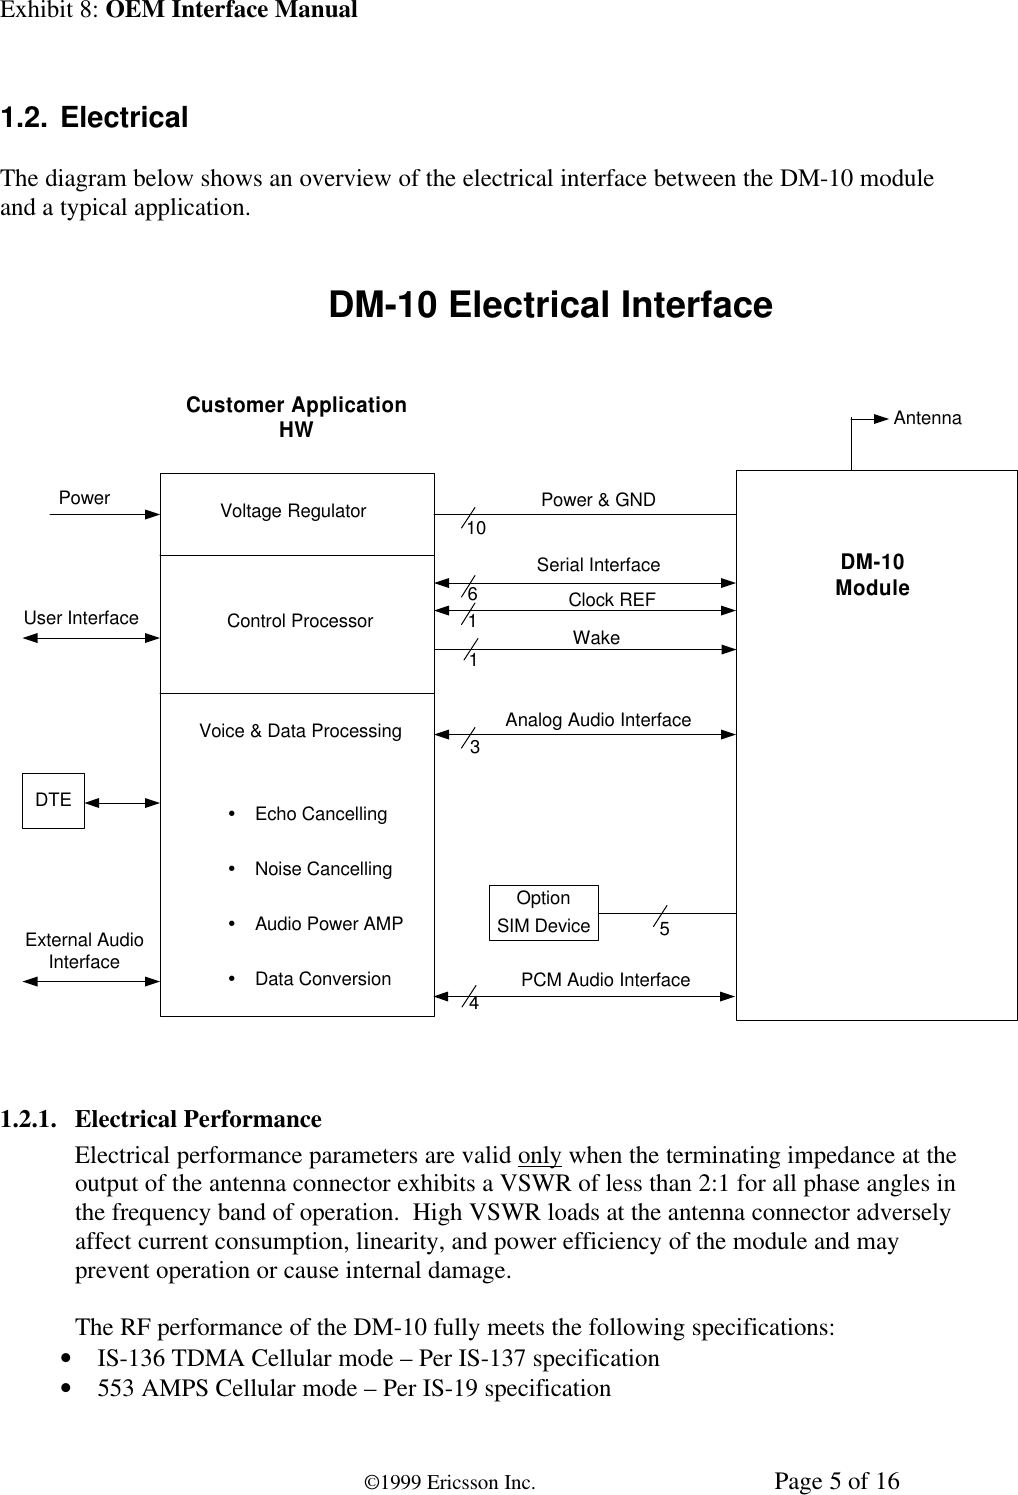 Exhibit 8: OEM Interface Manual©1999 Ericsson Inc. Page 5 of 161.2. ElectricalThe diagram below shows an overview of the electrical interface between the DM-10 moduleand a typical application.DM-10 Electrical InterfaceCustomer ApplicationHWVoltage RegulatorControl ProcessorVoice &amp; Data ProcessingŸEcho CancellingŸNoise CancellingŸAudio Power AMPŸData ConversionDTEPowerExternal AudioInterfaceAntennaUser Interface61Power &amp; GNDSerial InterfaceWakeAnalog Audio Interface101354Clock REFOptionSIM DeviceDM-10ModulePCM Audio Interface1.2.1. Electrical PerformanceElectrical performance parameters are valid only when the terminating impedance at theoutput of the antenna connector exhibits a VSWR of less than 2:1 for all phase angles inthe frequency band of operation.  High VSWR loads at the antenna connector adverselyaffect current consumption, linearity, and power efficiency of the module and mayprevent operation or cause internal damage.The RF performance of the DM-10 fully meets the following specifications:• IS-136 TDMA Cellular mode – Per IS-137 specification• 553 AMPS Cellular mode – Per IS-19 specification